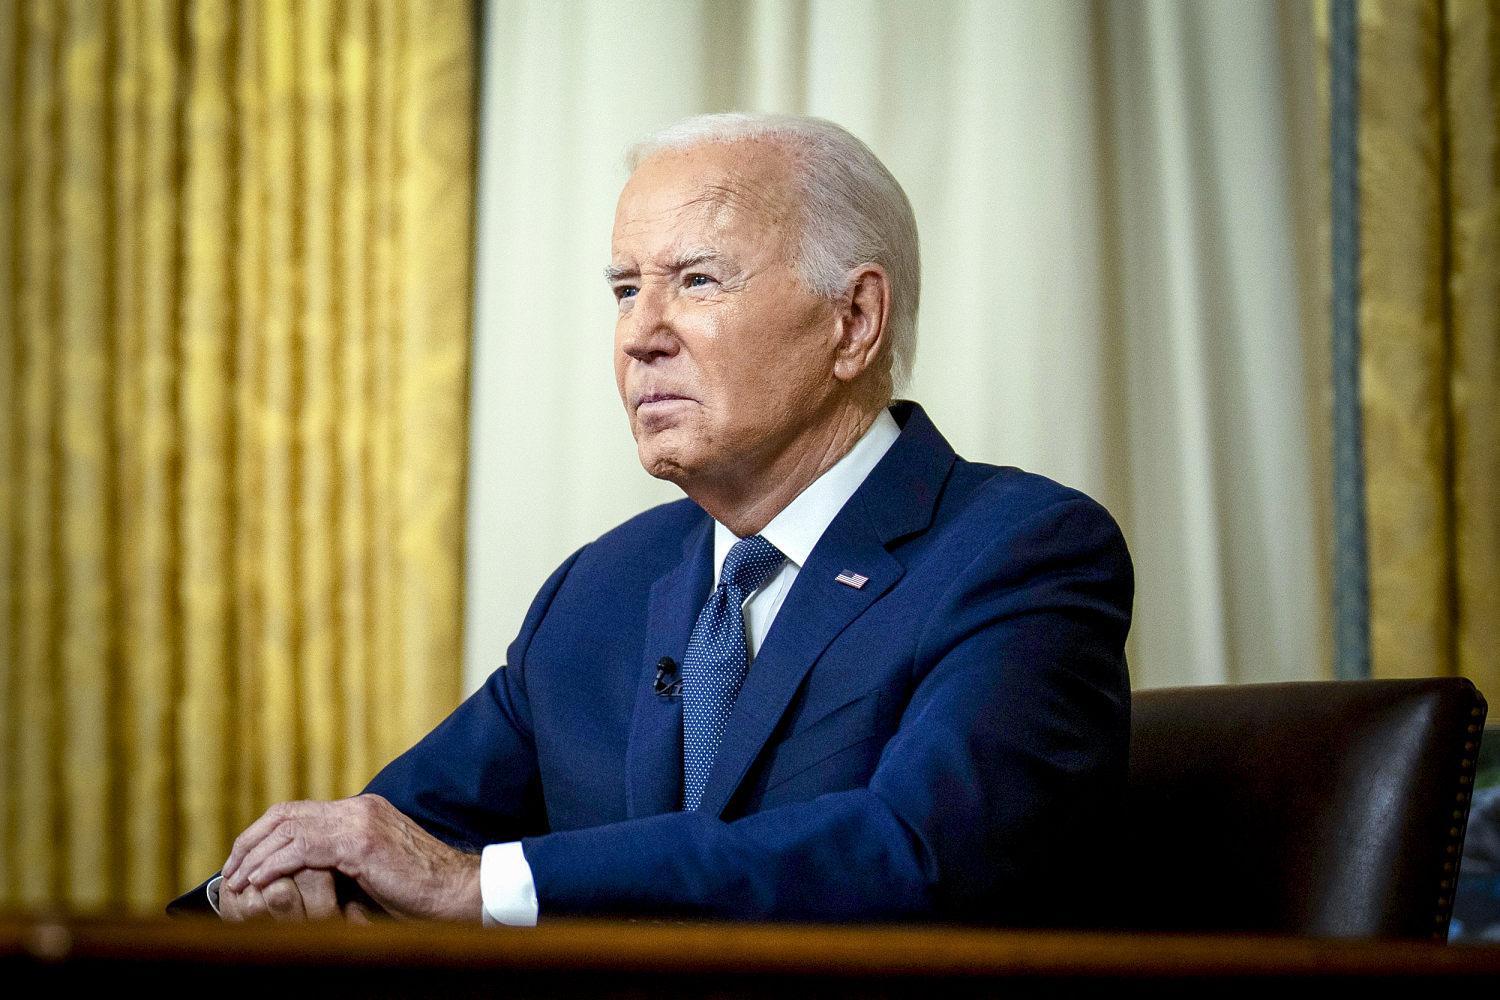 Biden tests positive for Covid-19 and will self-isolate in Delaware, White House says